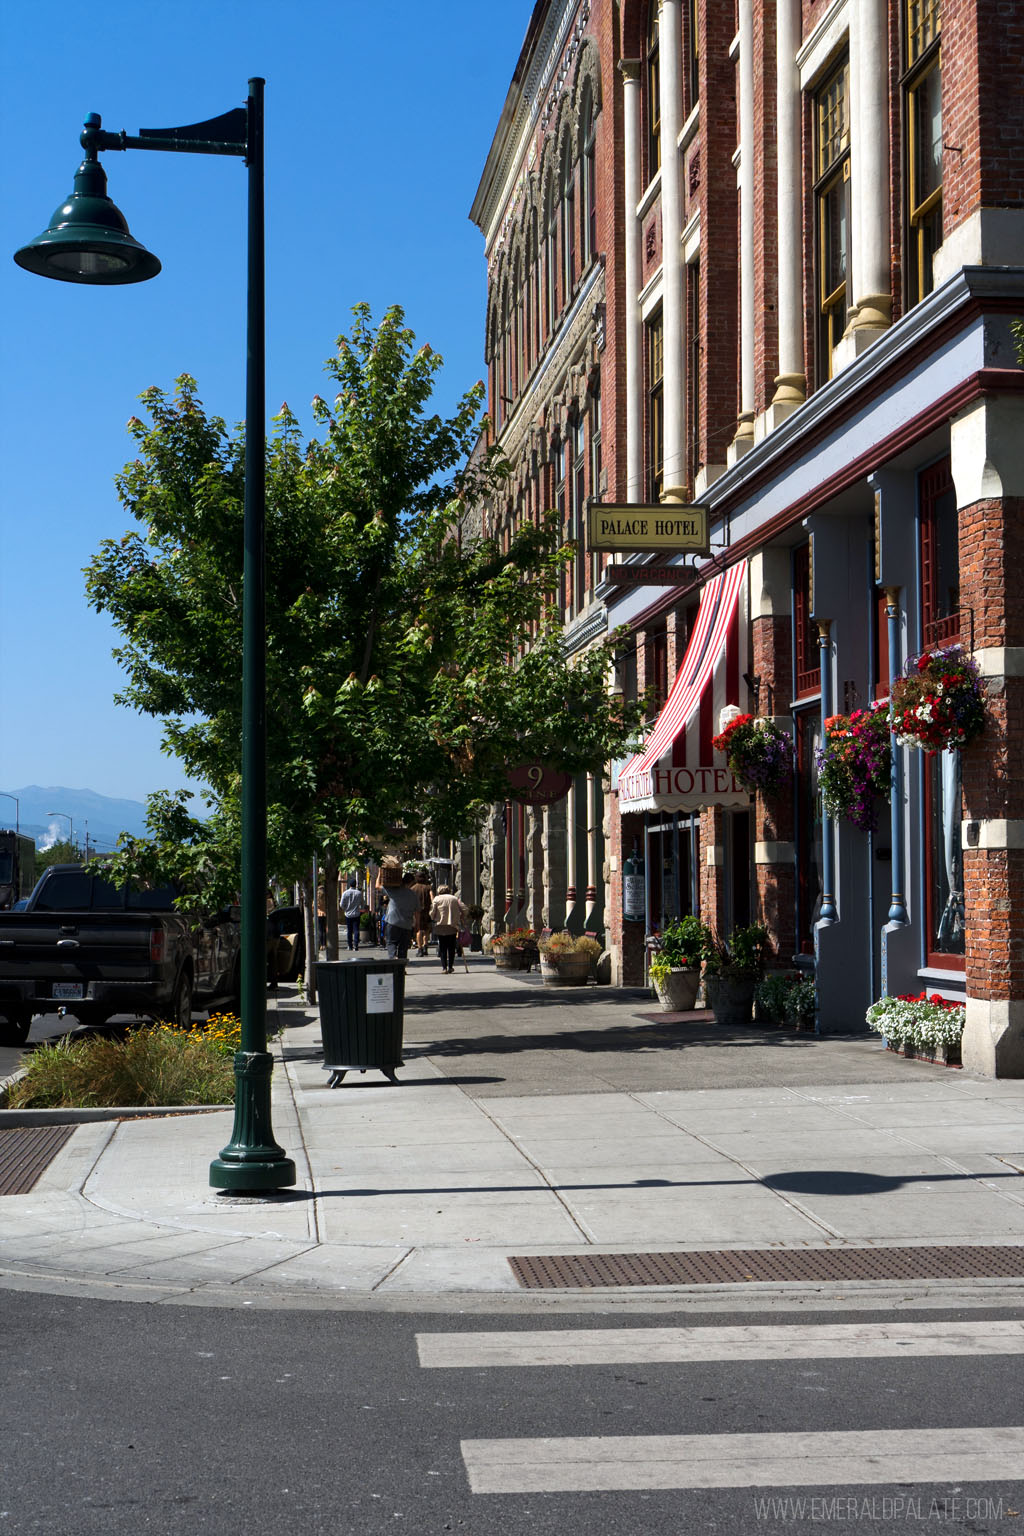 downtown Port Townsend, a historic Victorian town in Washington